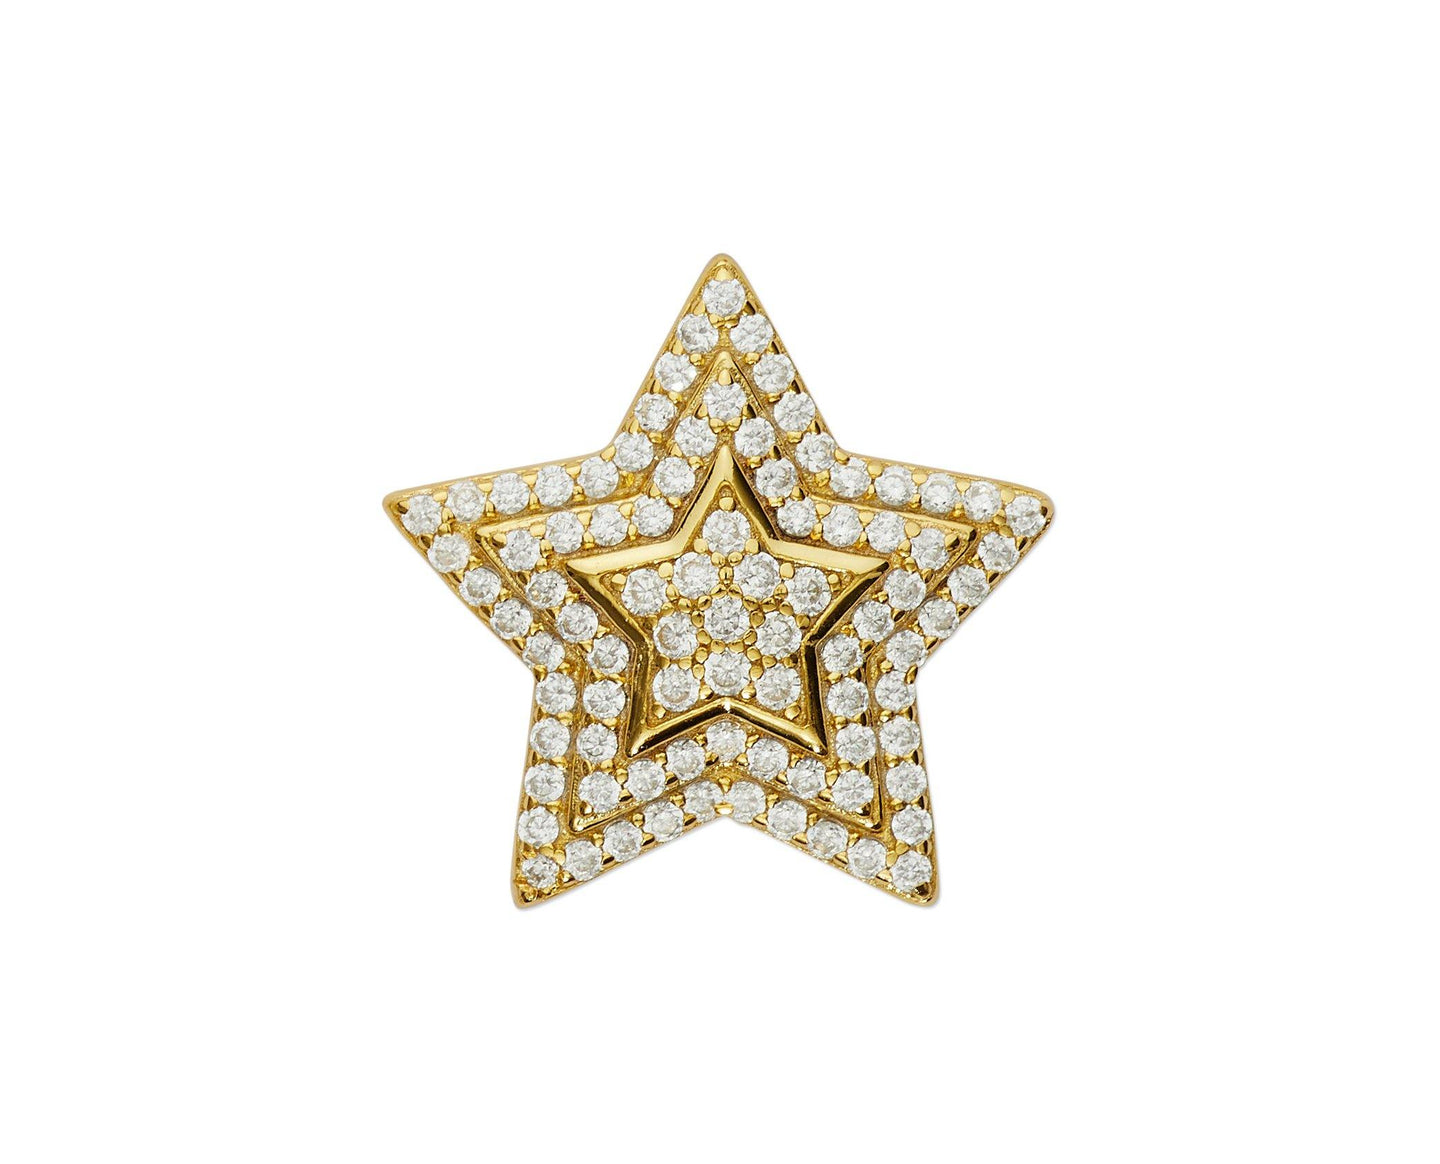 Star Lapel Pin - InclusiveJewelry